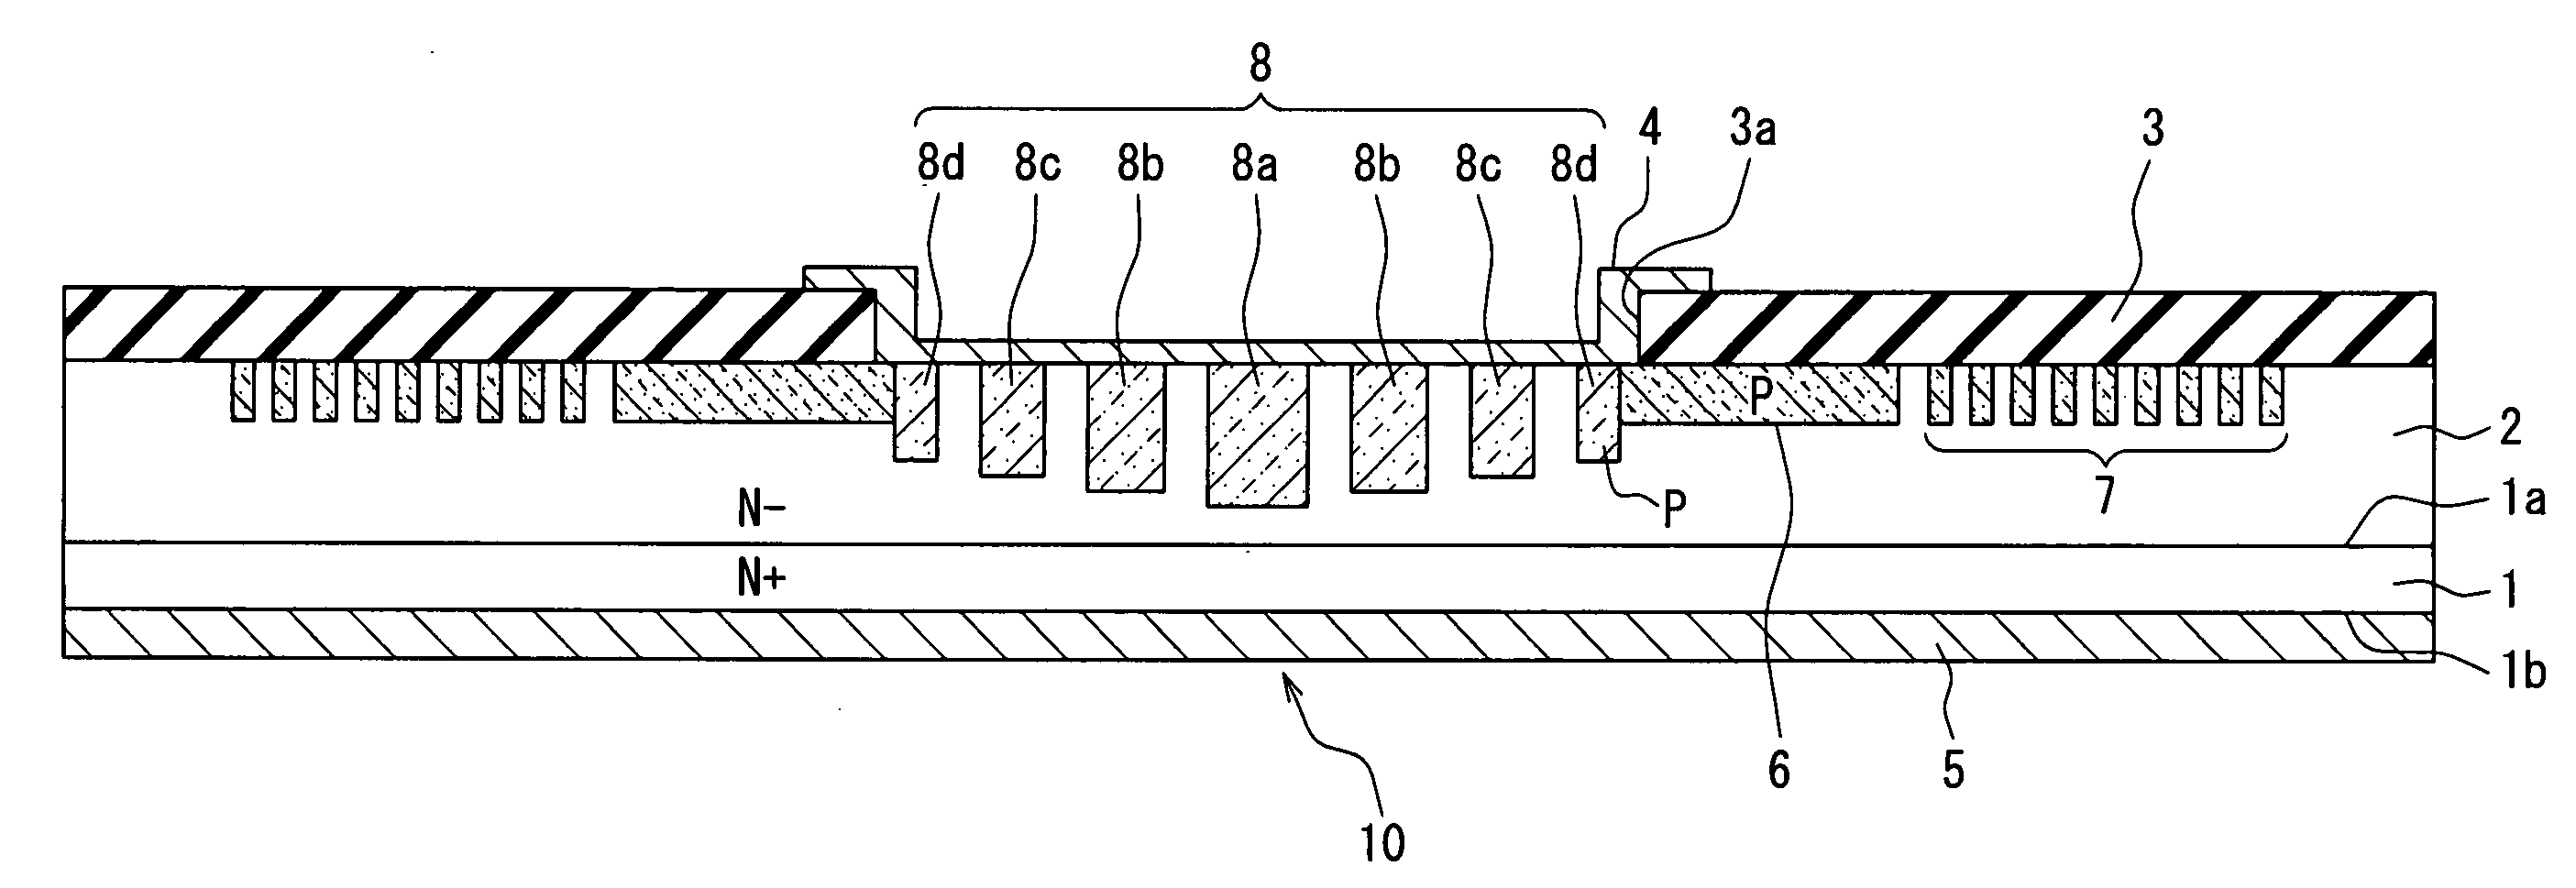 Silicon carbide semiconductor device having junction barrier schottky diode